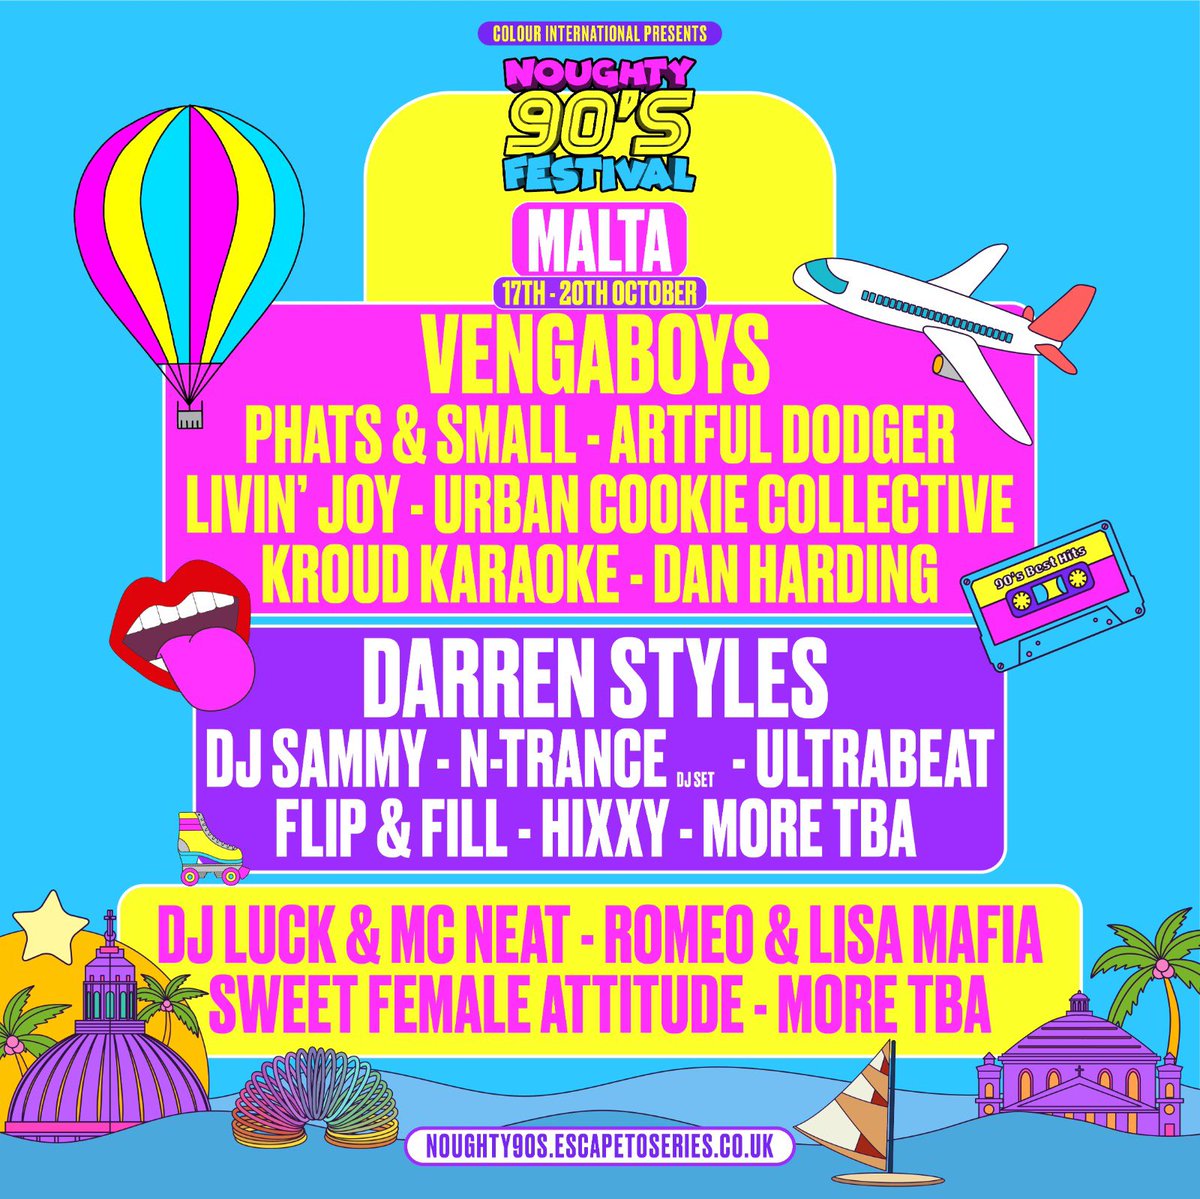 MALTA HERES YOUR LINE UP 🤩 Join us overseas 🏝🤩✈️ 🔗 noughty90s.escapetoseries.co.uk